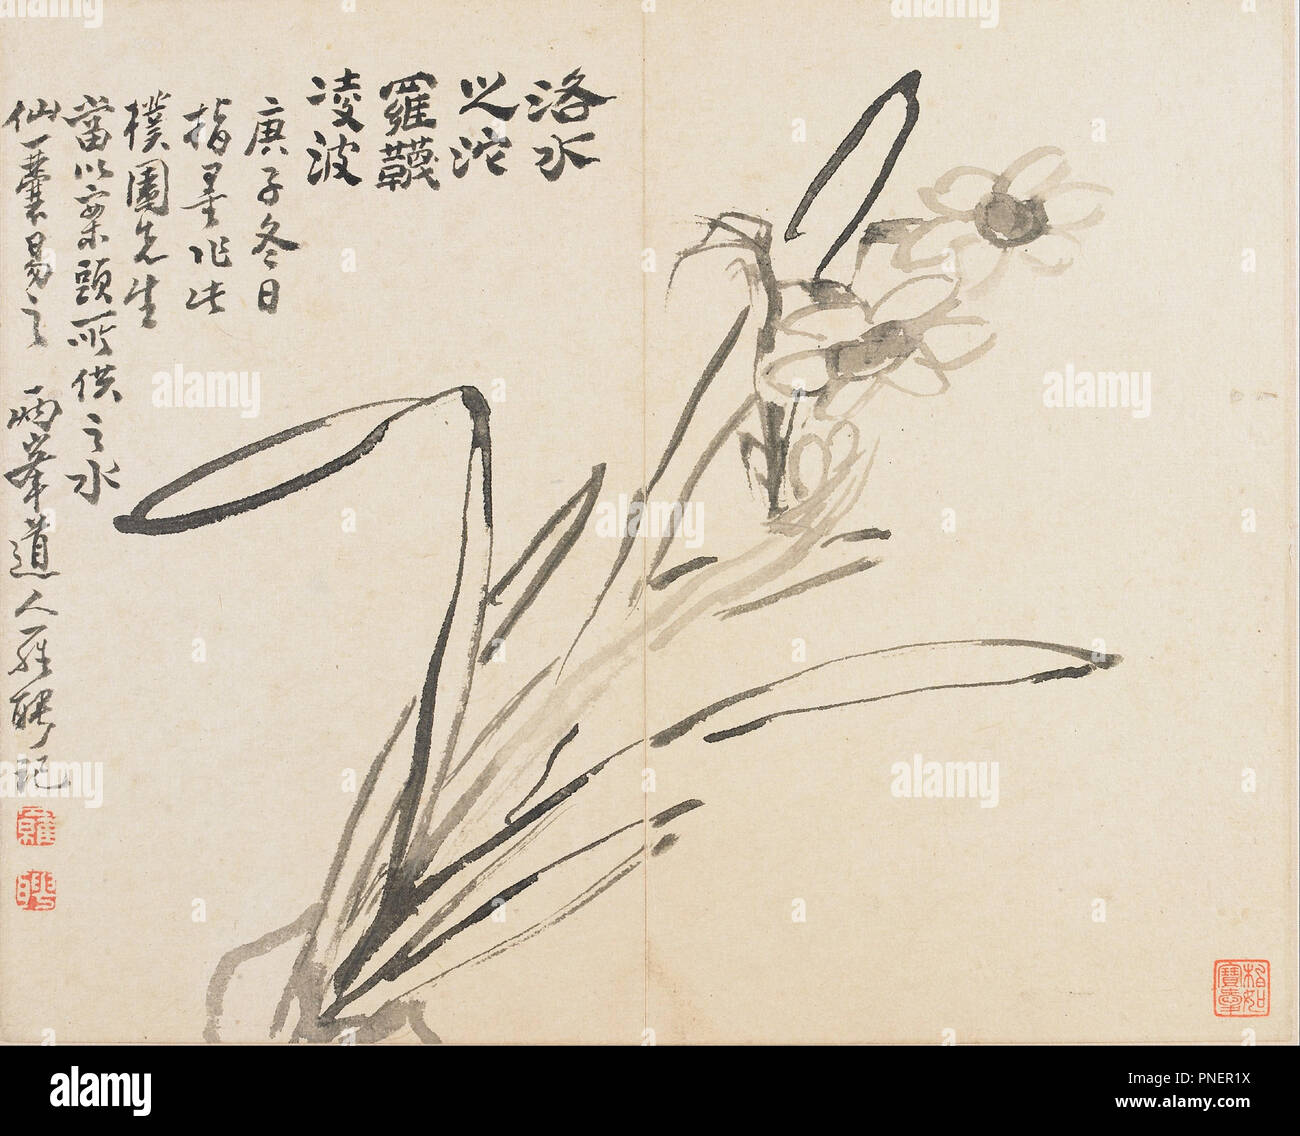 Landscapes, Flowers and Birds: Narcissus. Date/Period: 1780. Album. Ink on paper. Height: 282 mm (11.10 in); Width: 679 mm (26.73 in). Author: LUO PING. Stock Photo